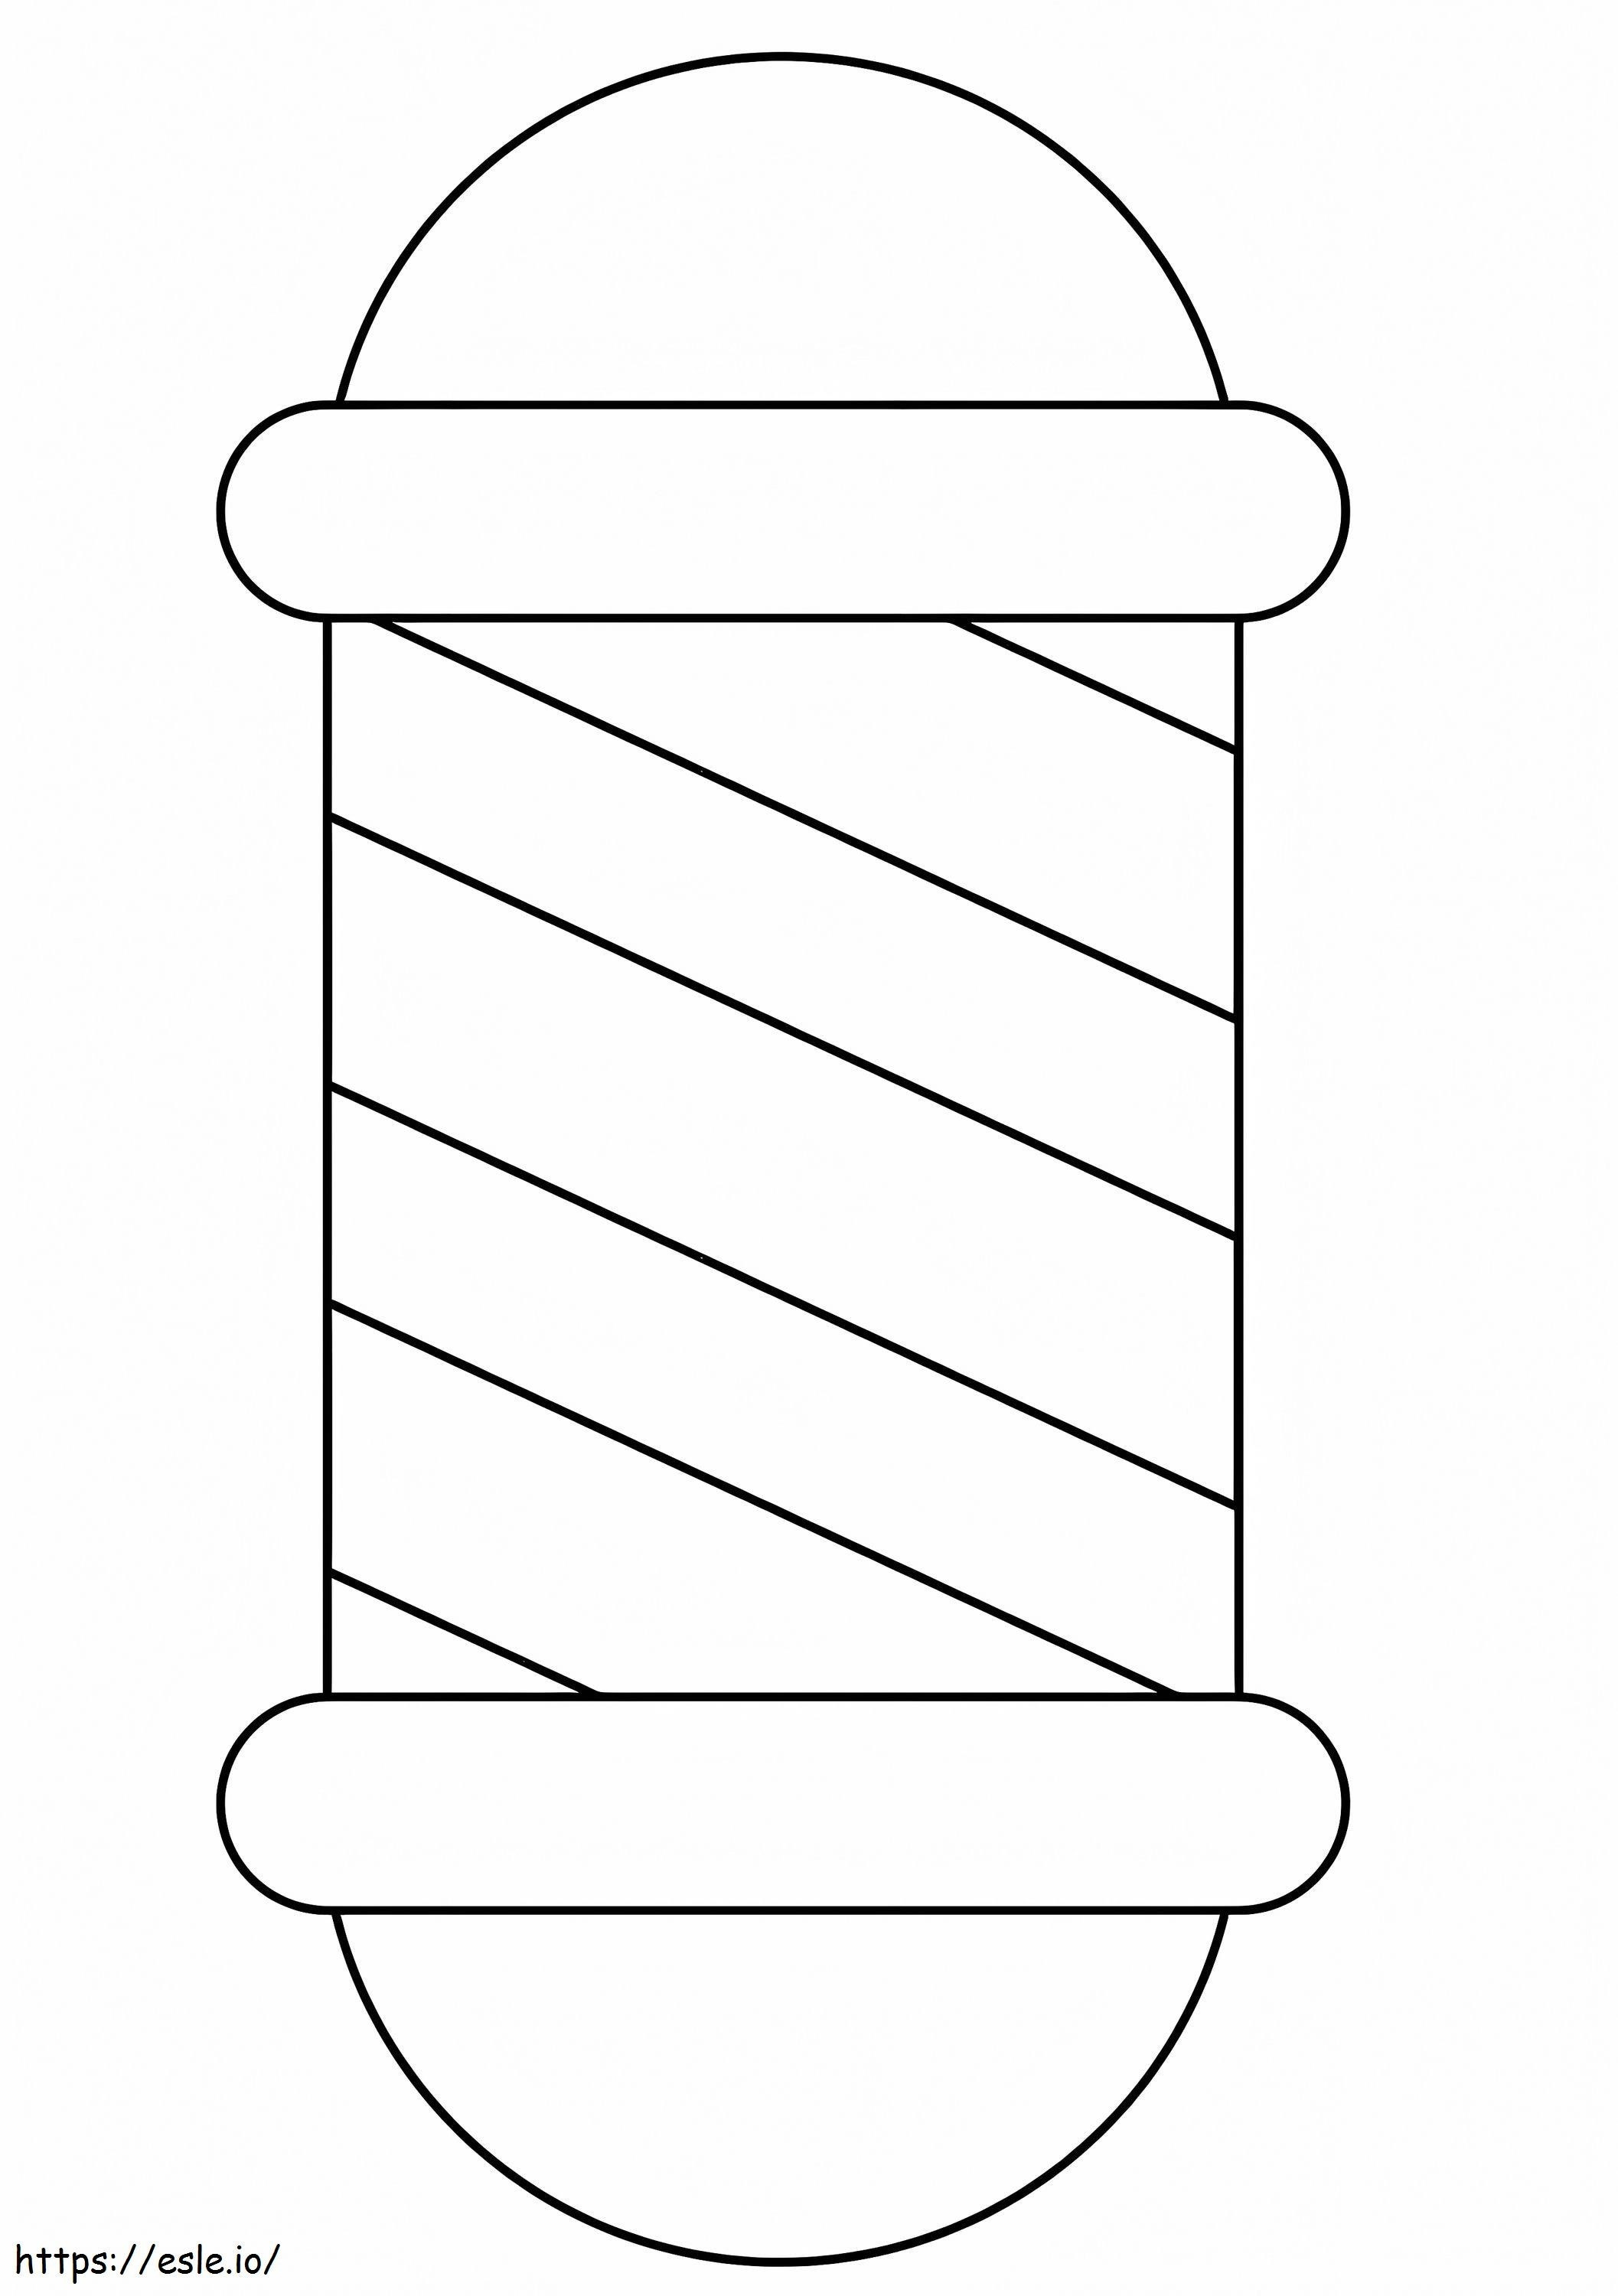 Barber Pole coloring page